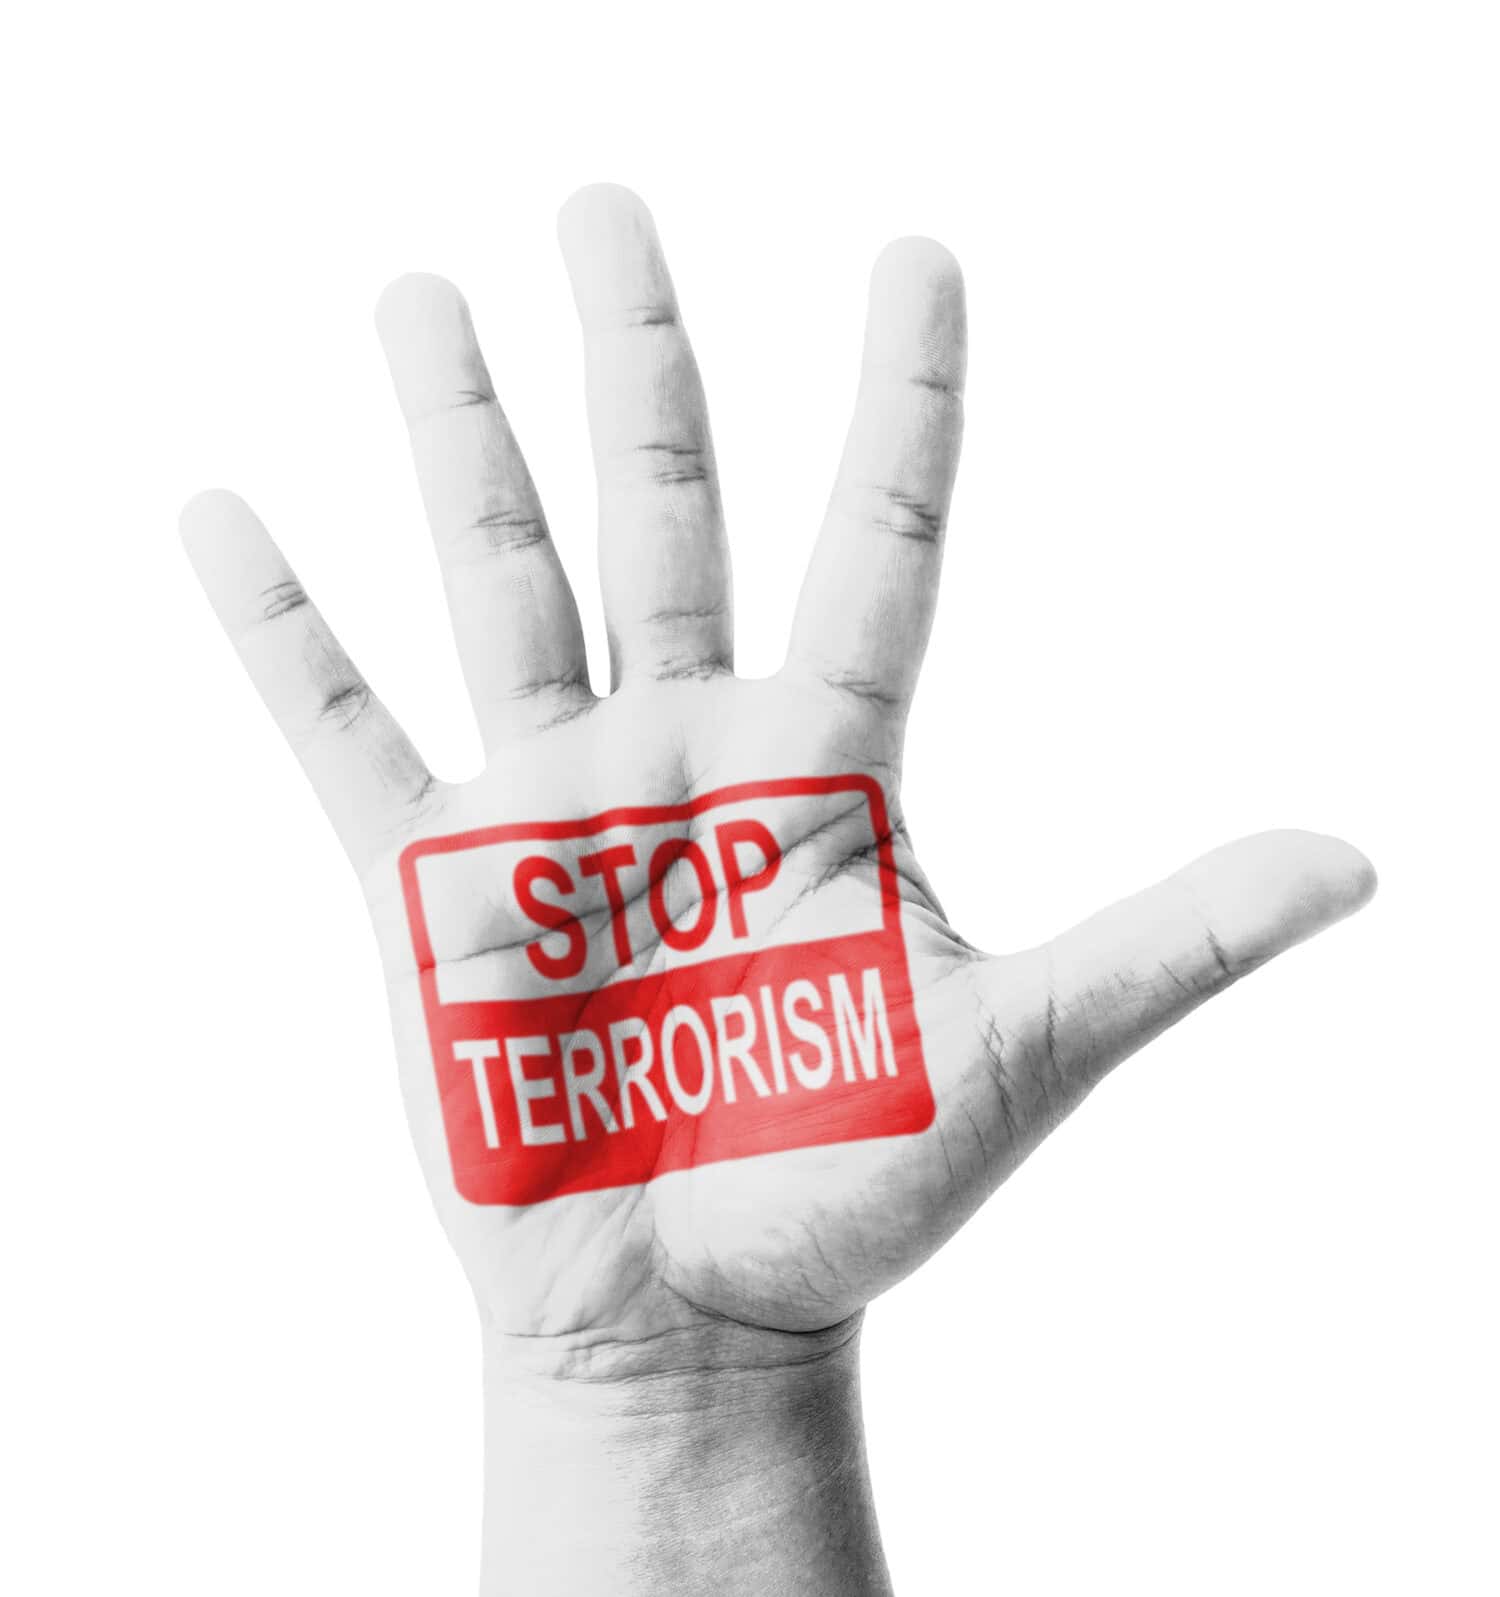 Open hand raised, Stop Terrorism sign painted, multi purpose concept - isolated on white background